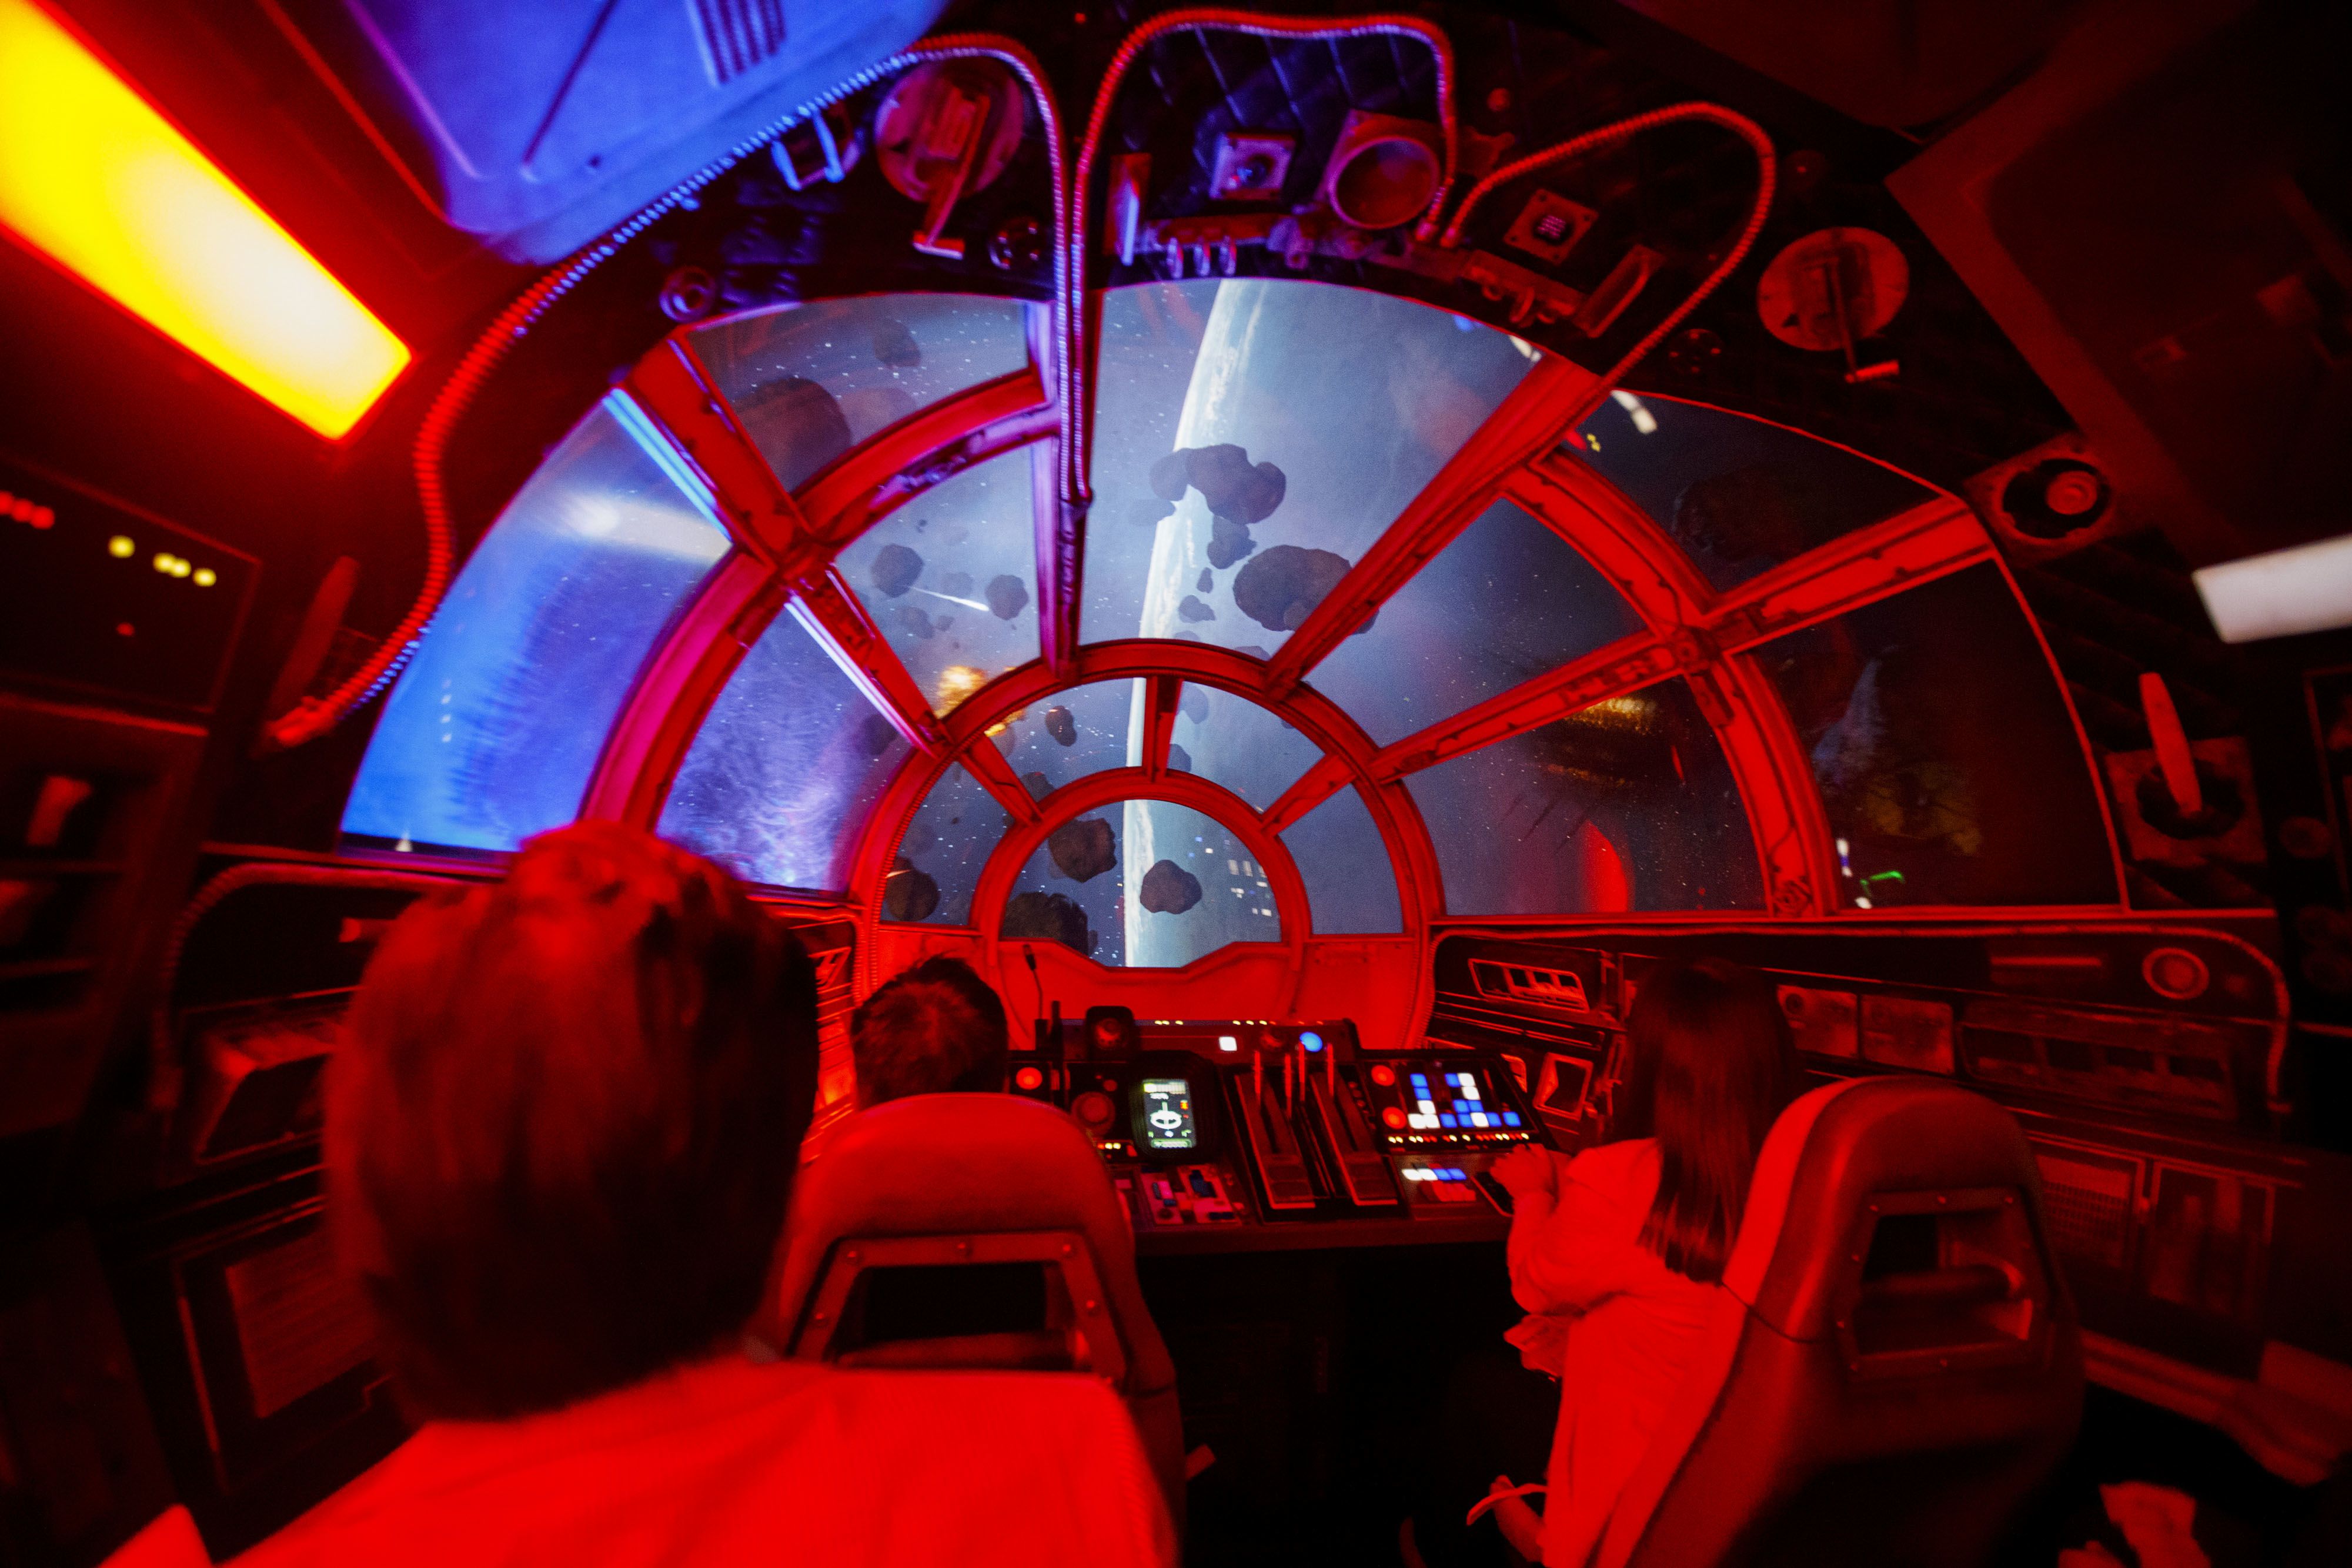 Here's what it's like to fly the Millennium Falcon at Star Wars: Galaxy's Edge